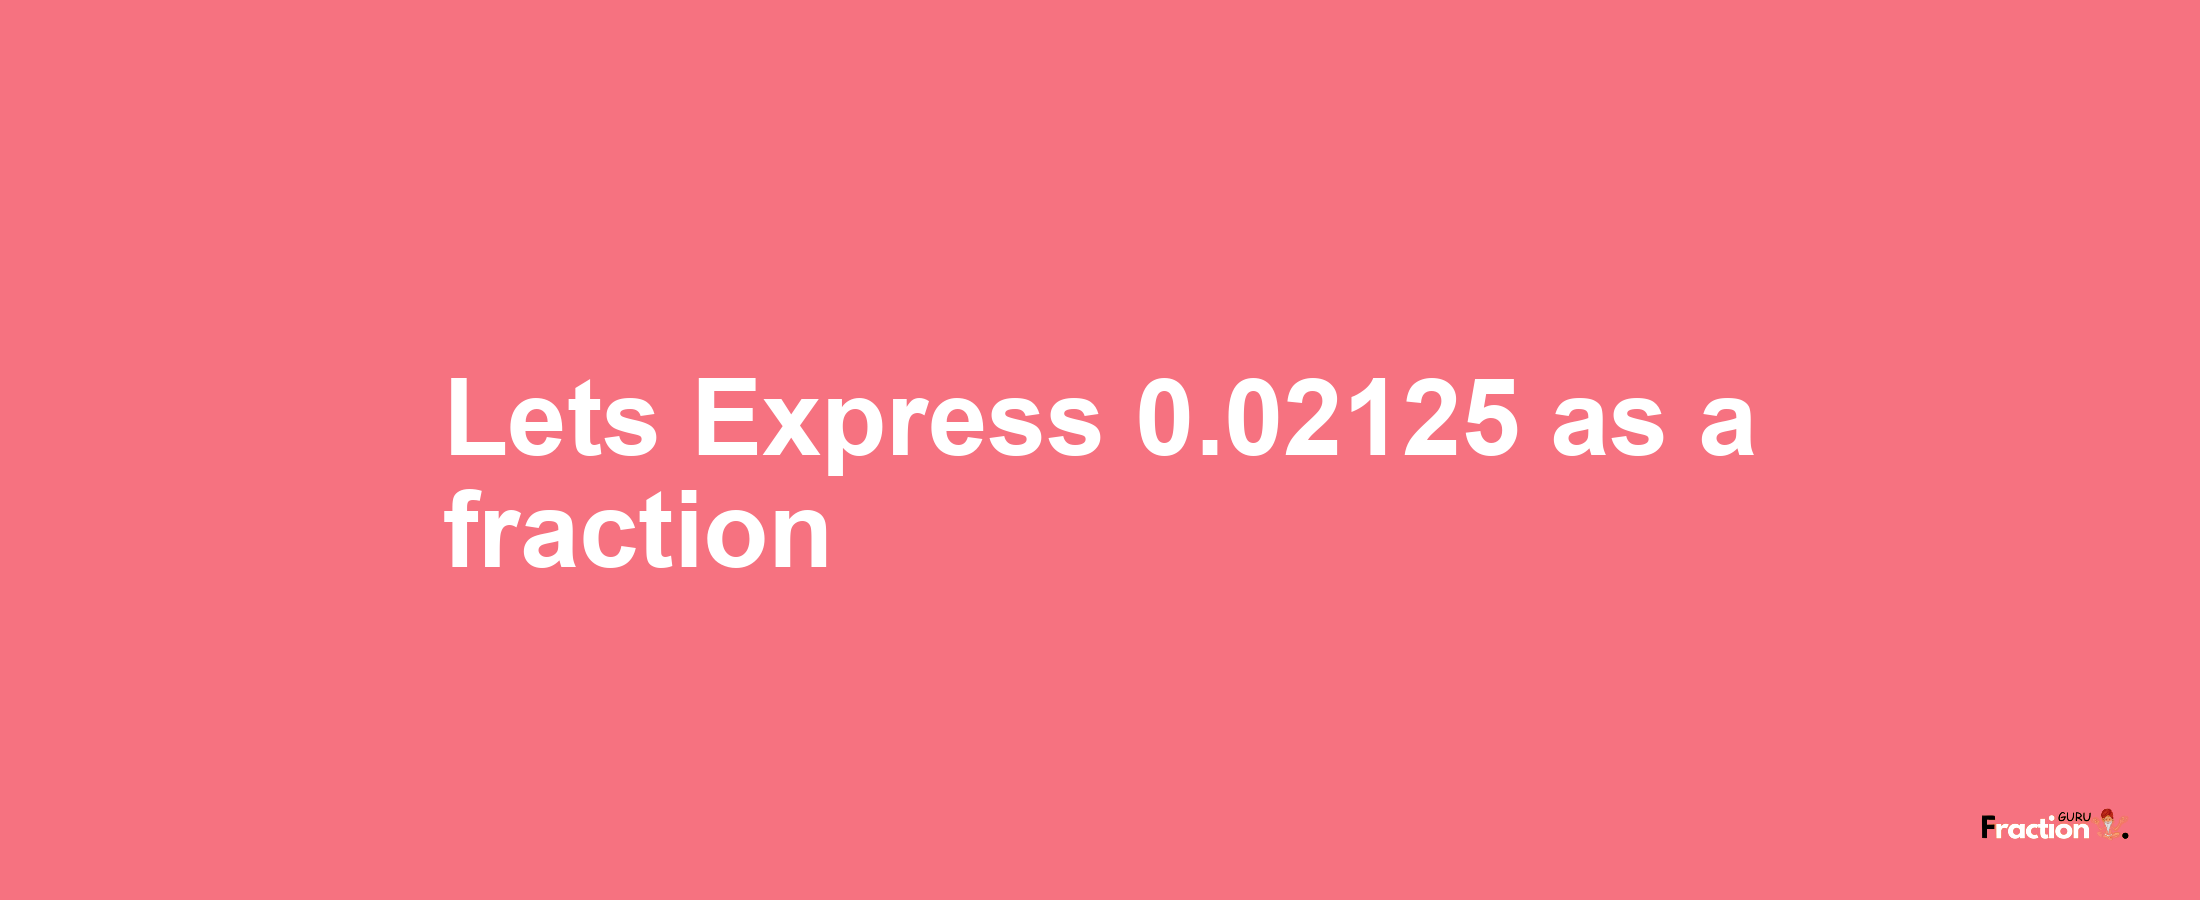 Lets Express 0.02125 as afraction